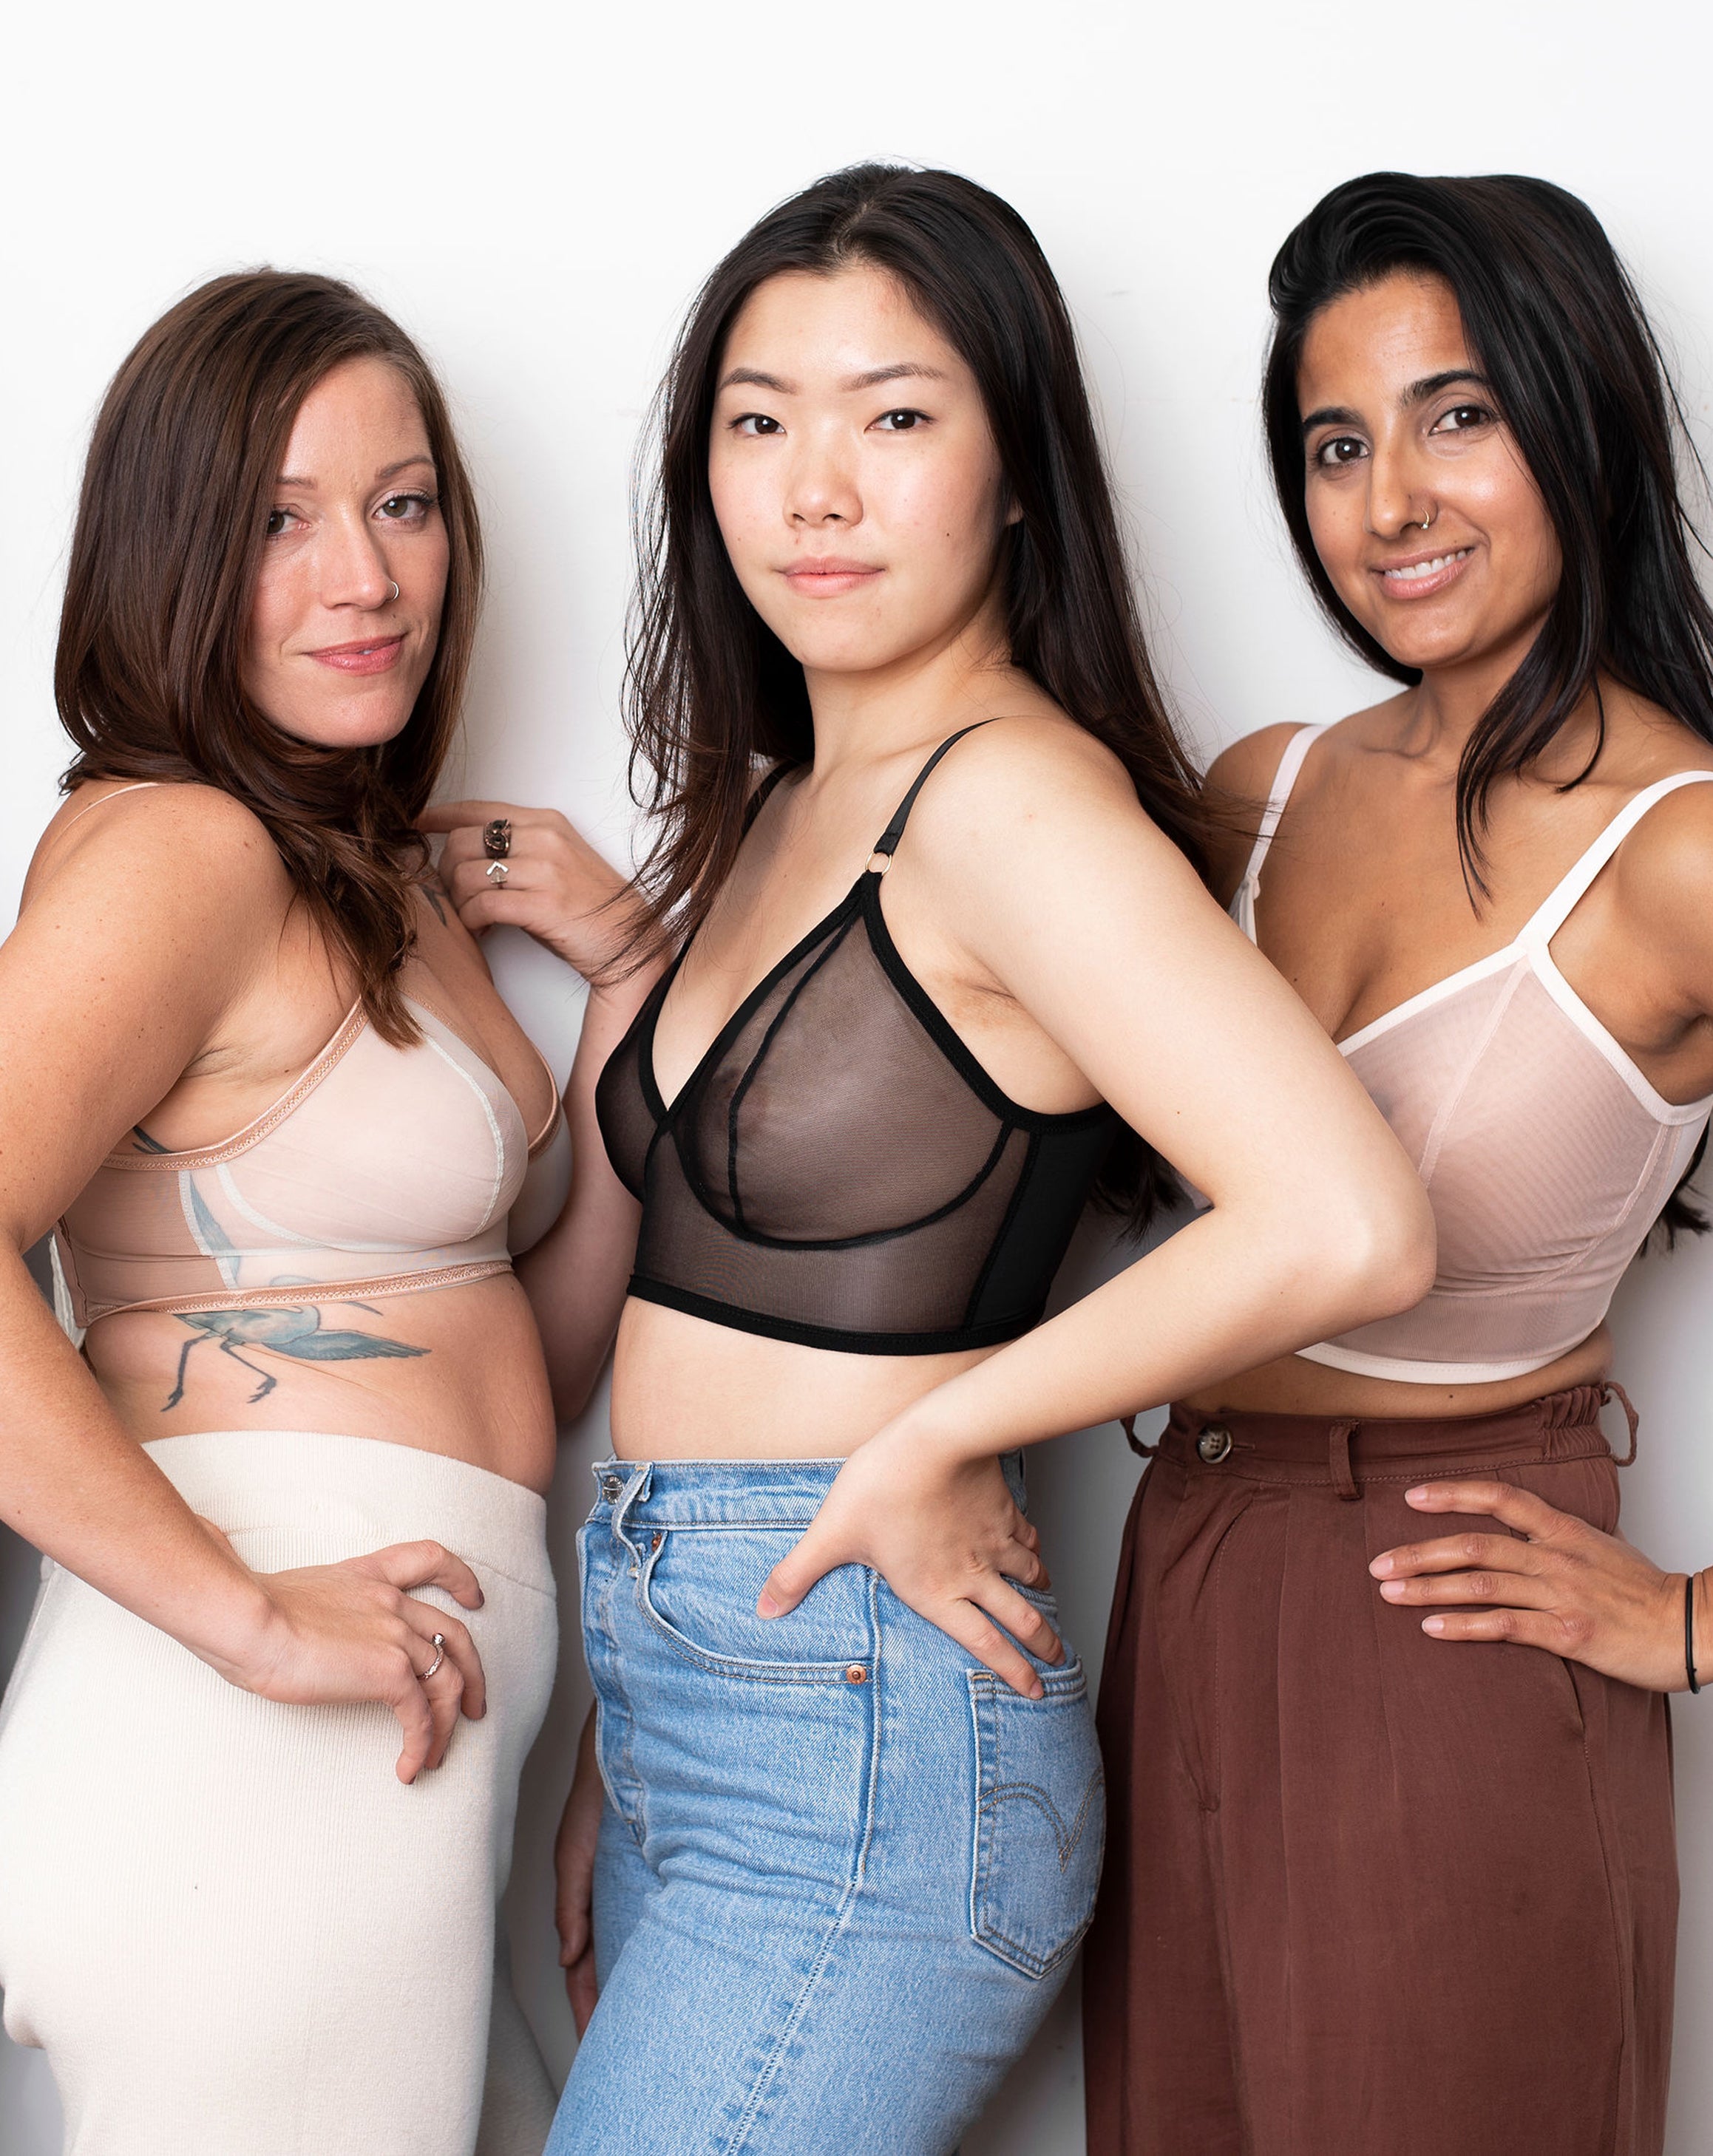 Get Educated on Bras & Breast Health From Our Bra Fitting Experts